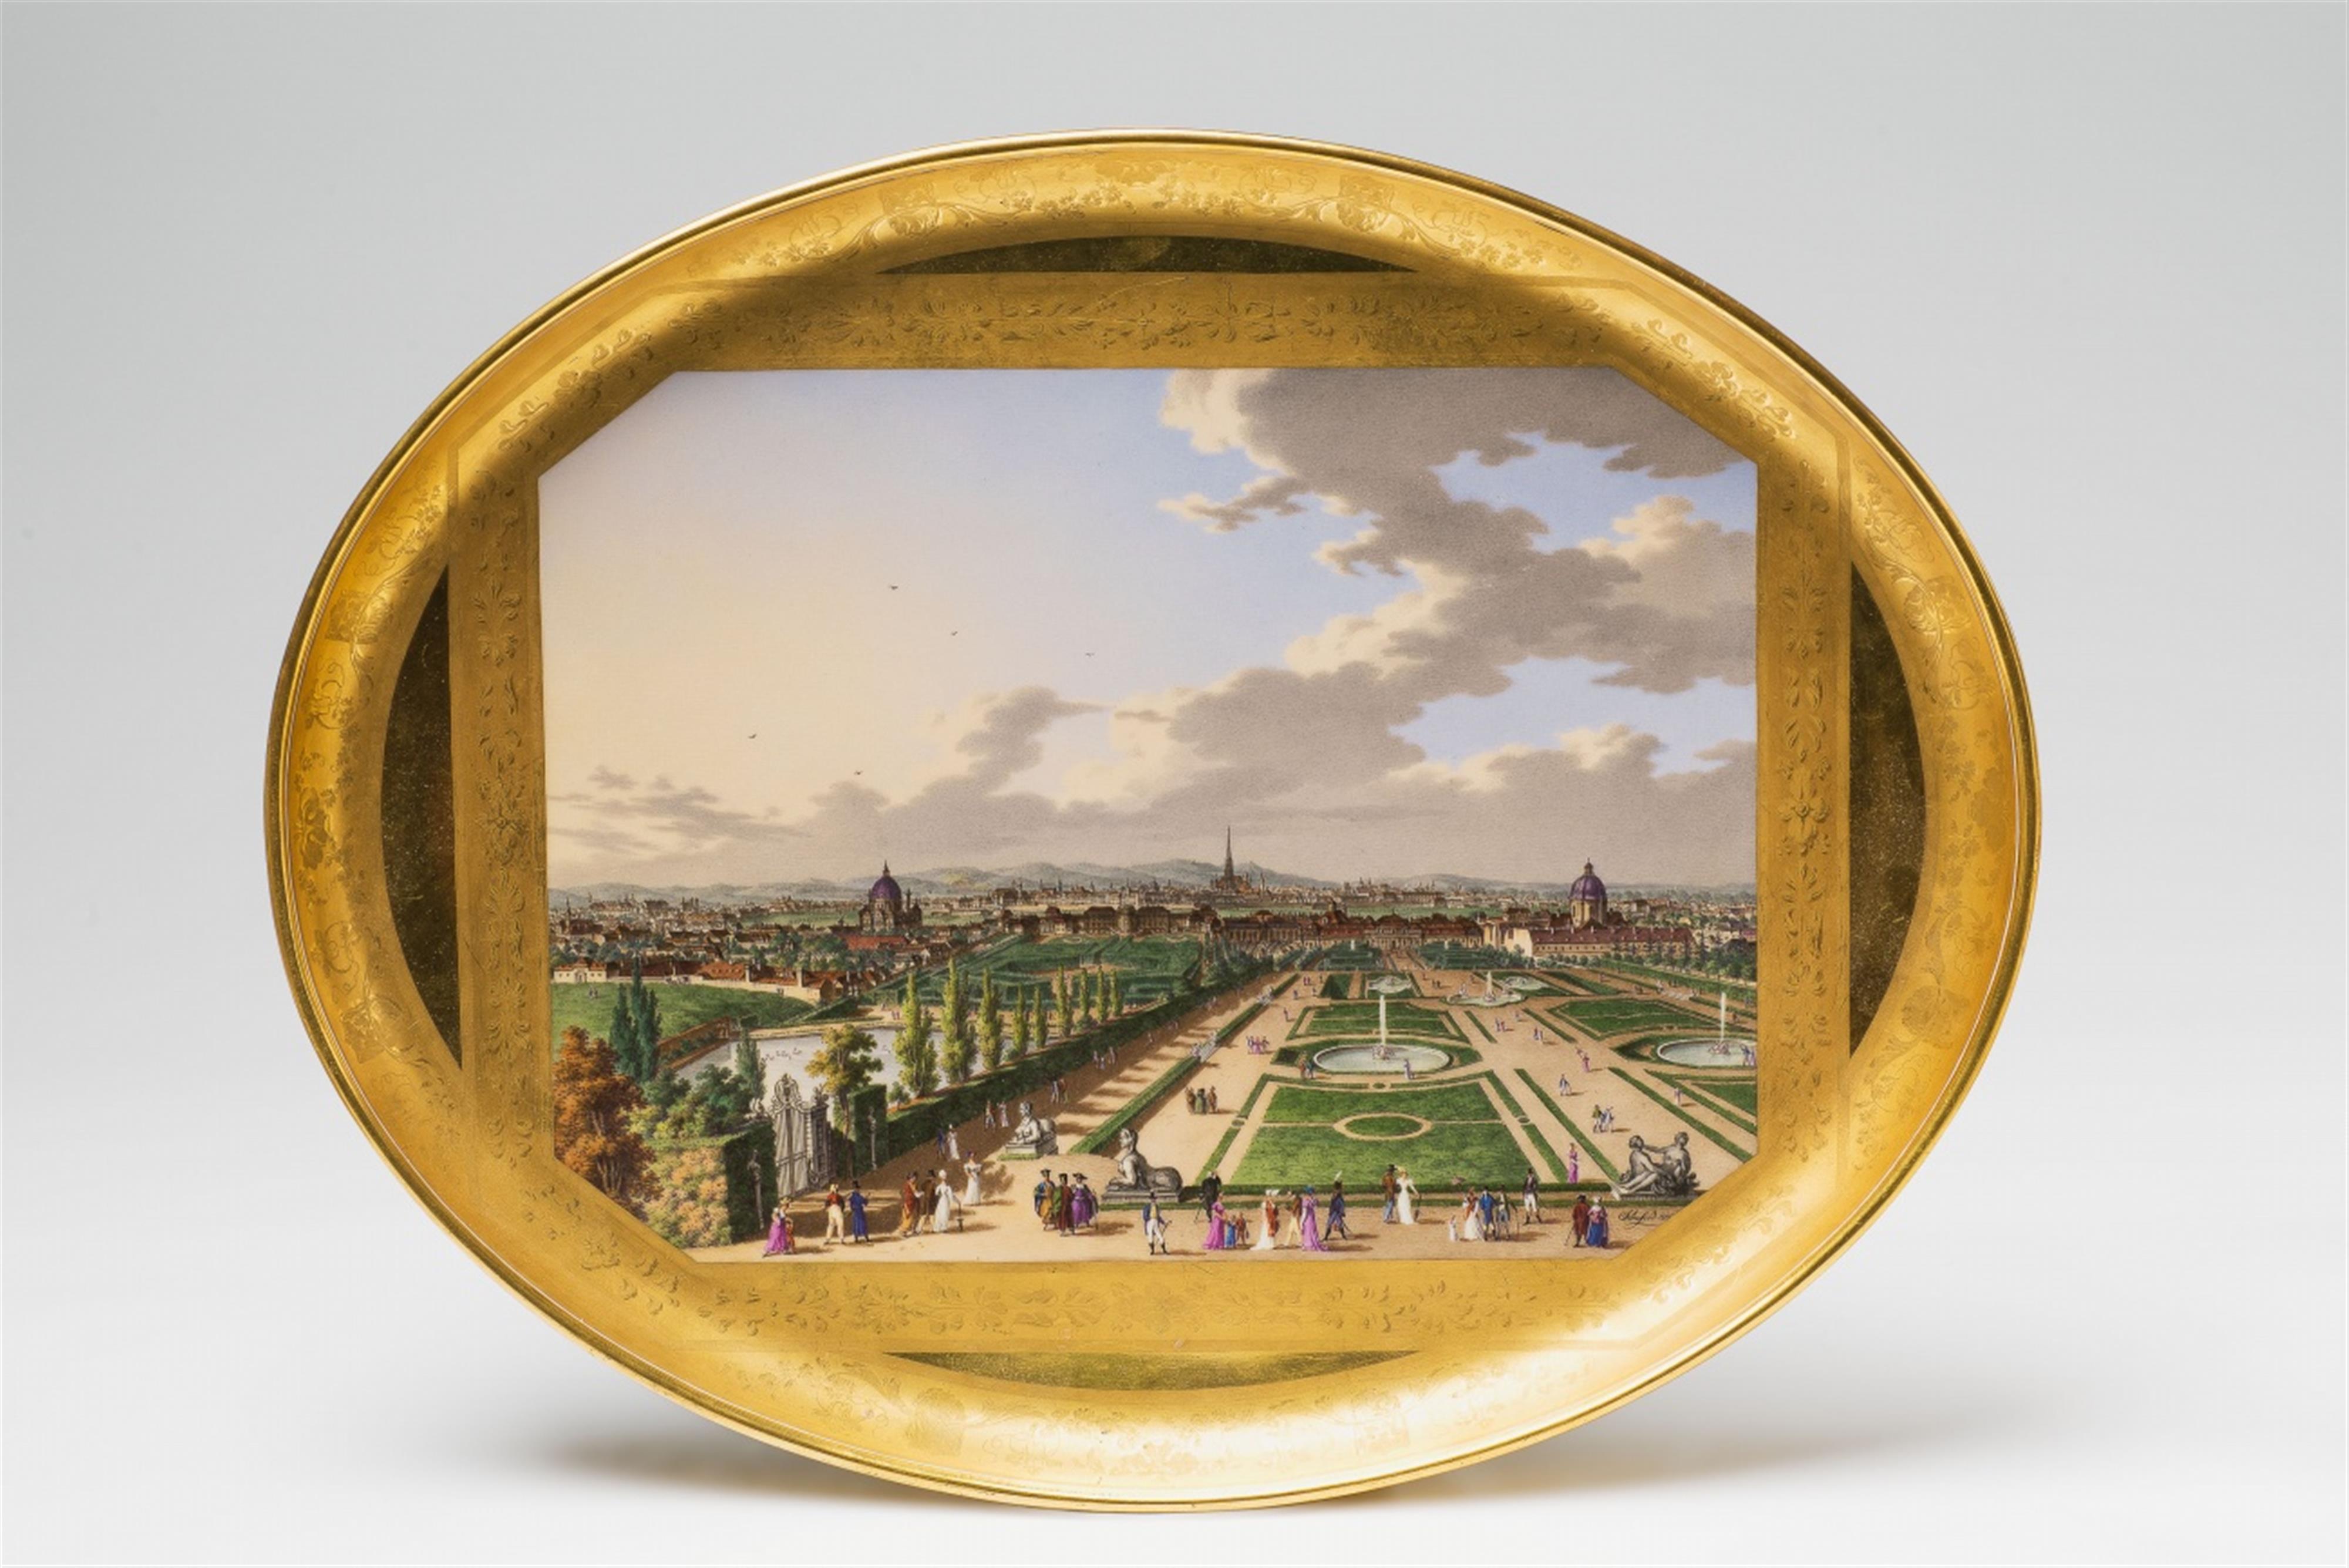 A Niedermayer porcelain déjeuner with views of imperial palaces in Vienna - image-3